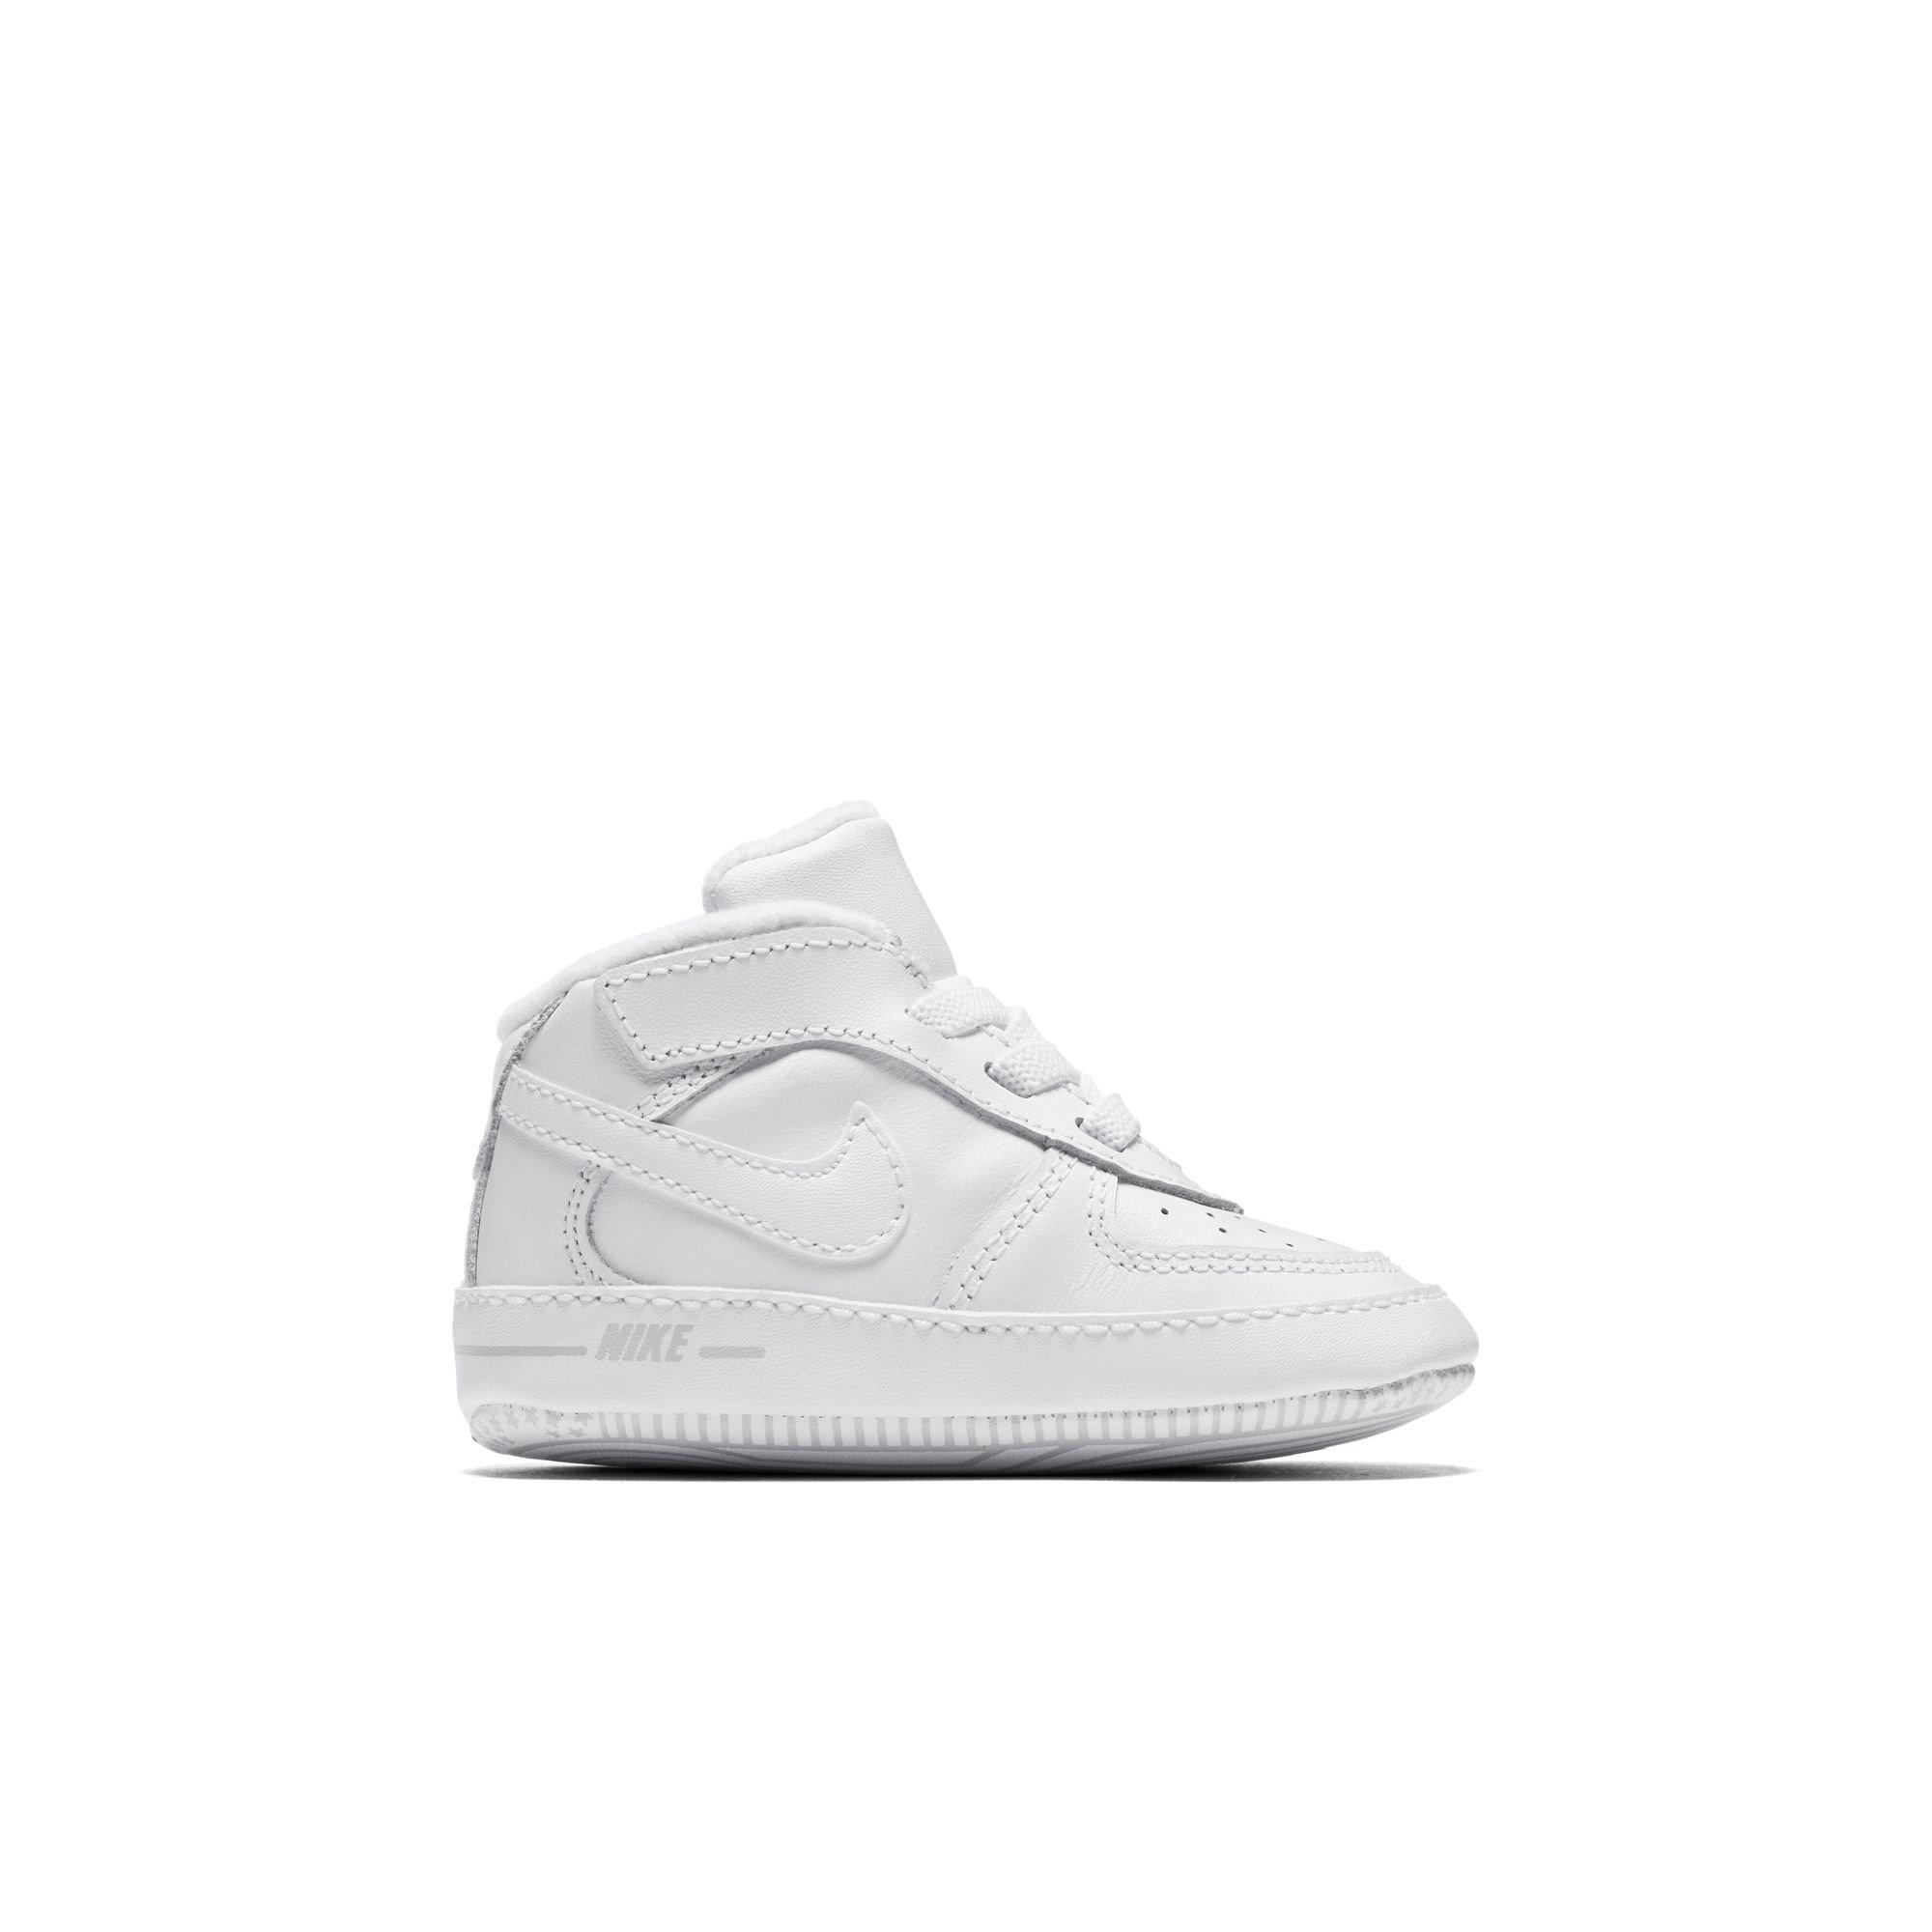 air force 1 infant size 3